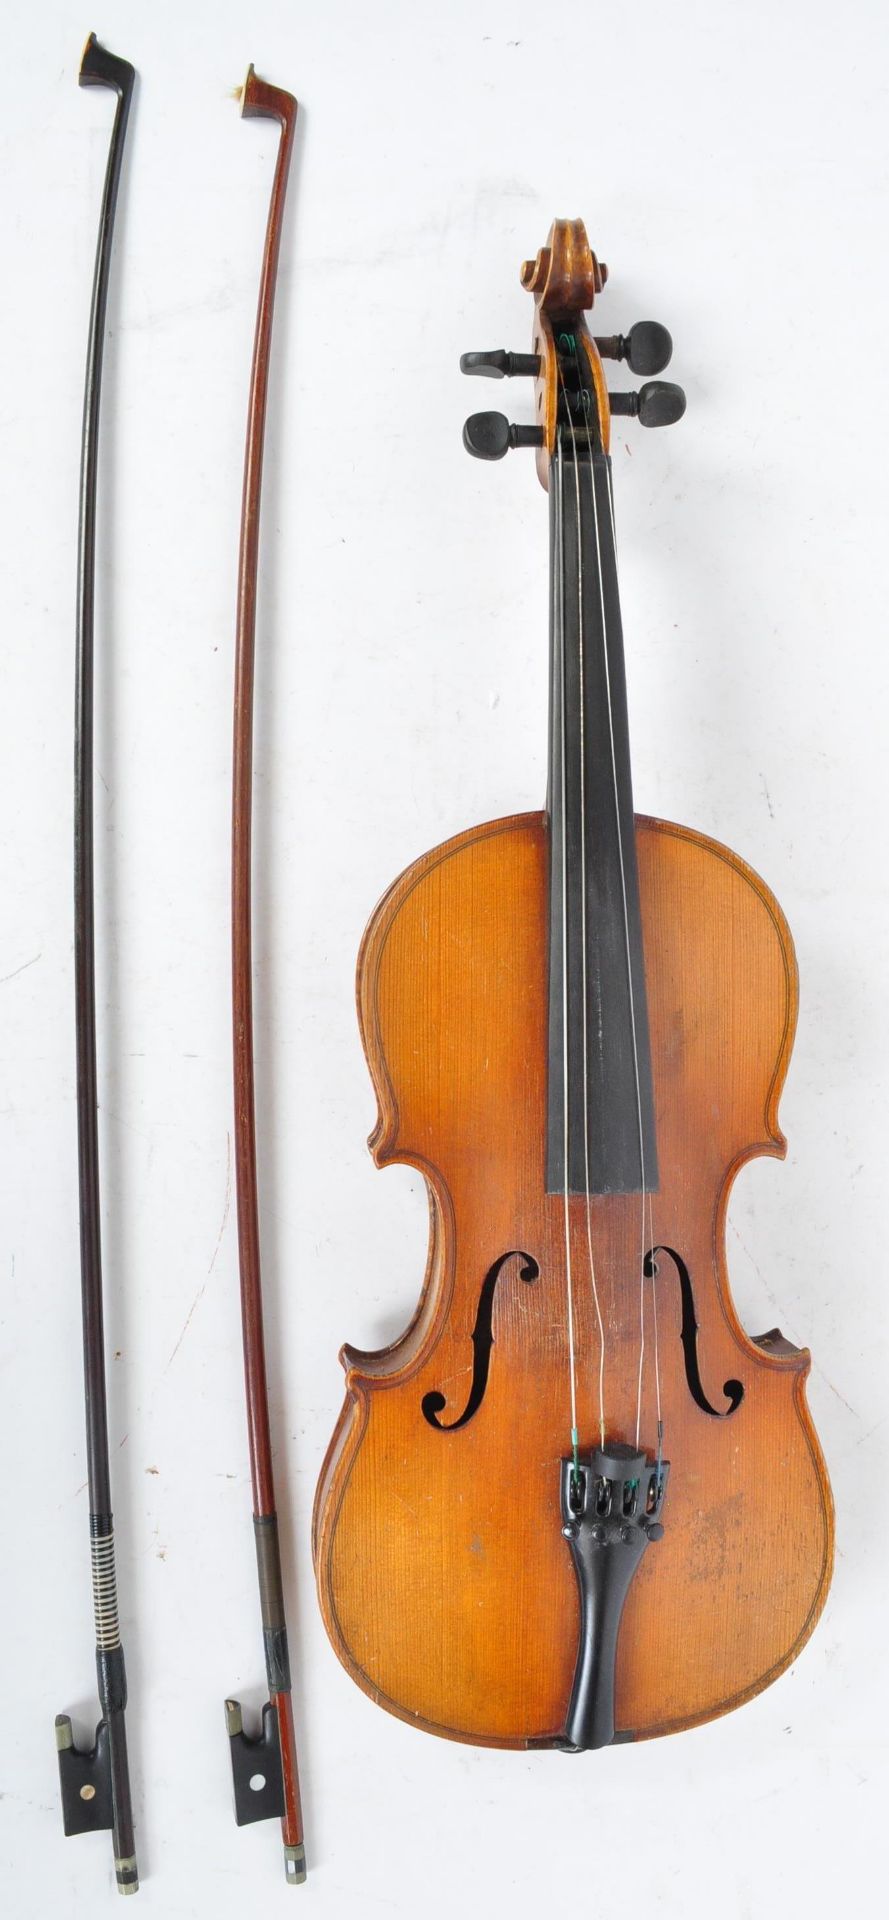 VINTAGE 20TH CENTURY GERMAN MADE VIOLIN WITH TWO BOWS - Image 3 of 4